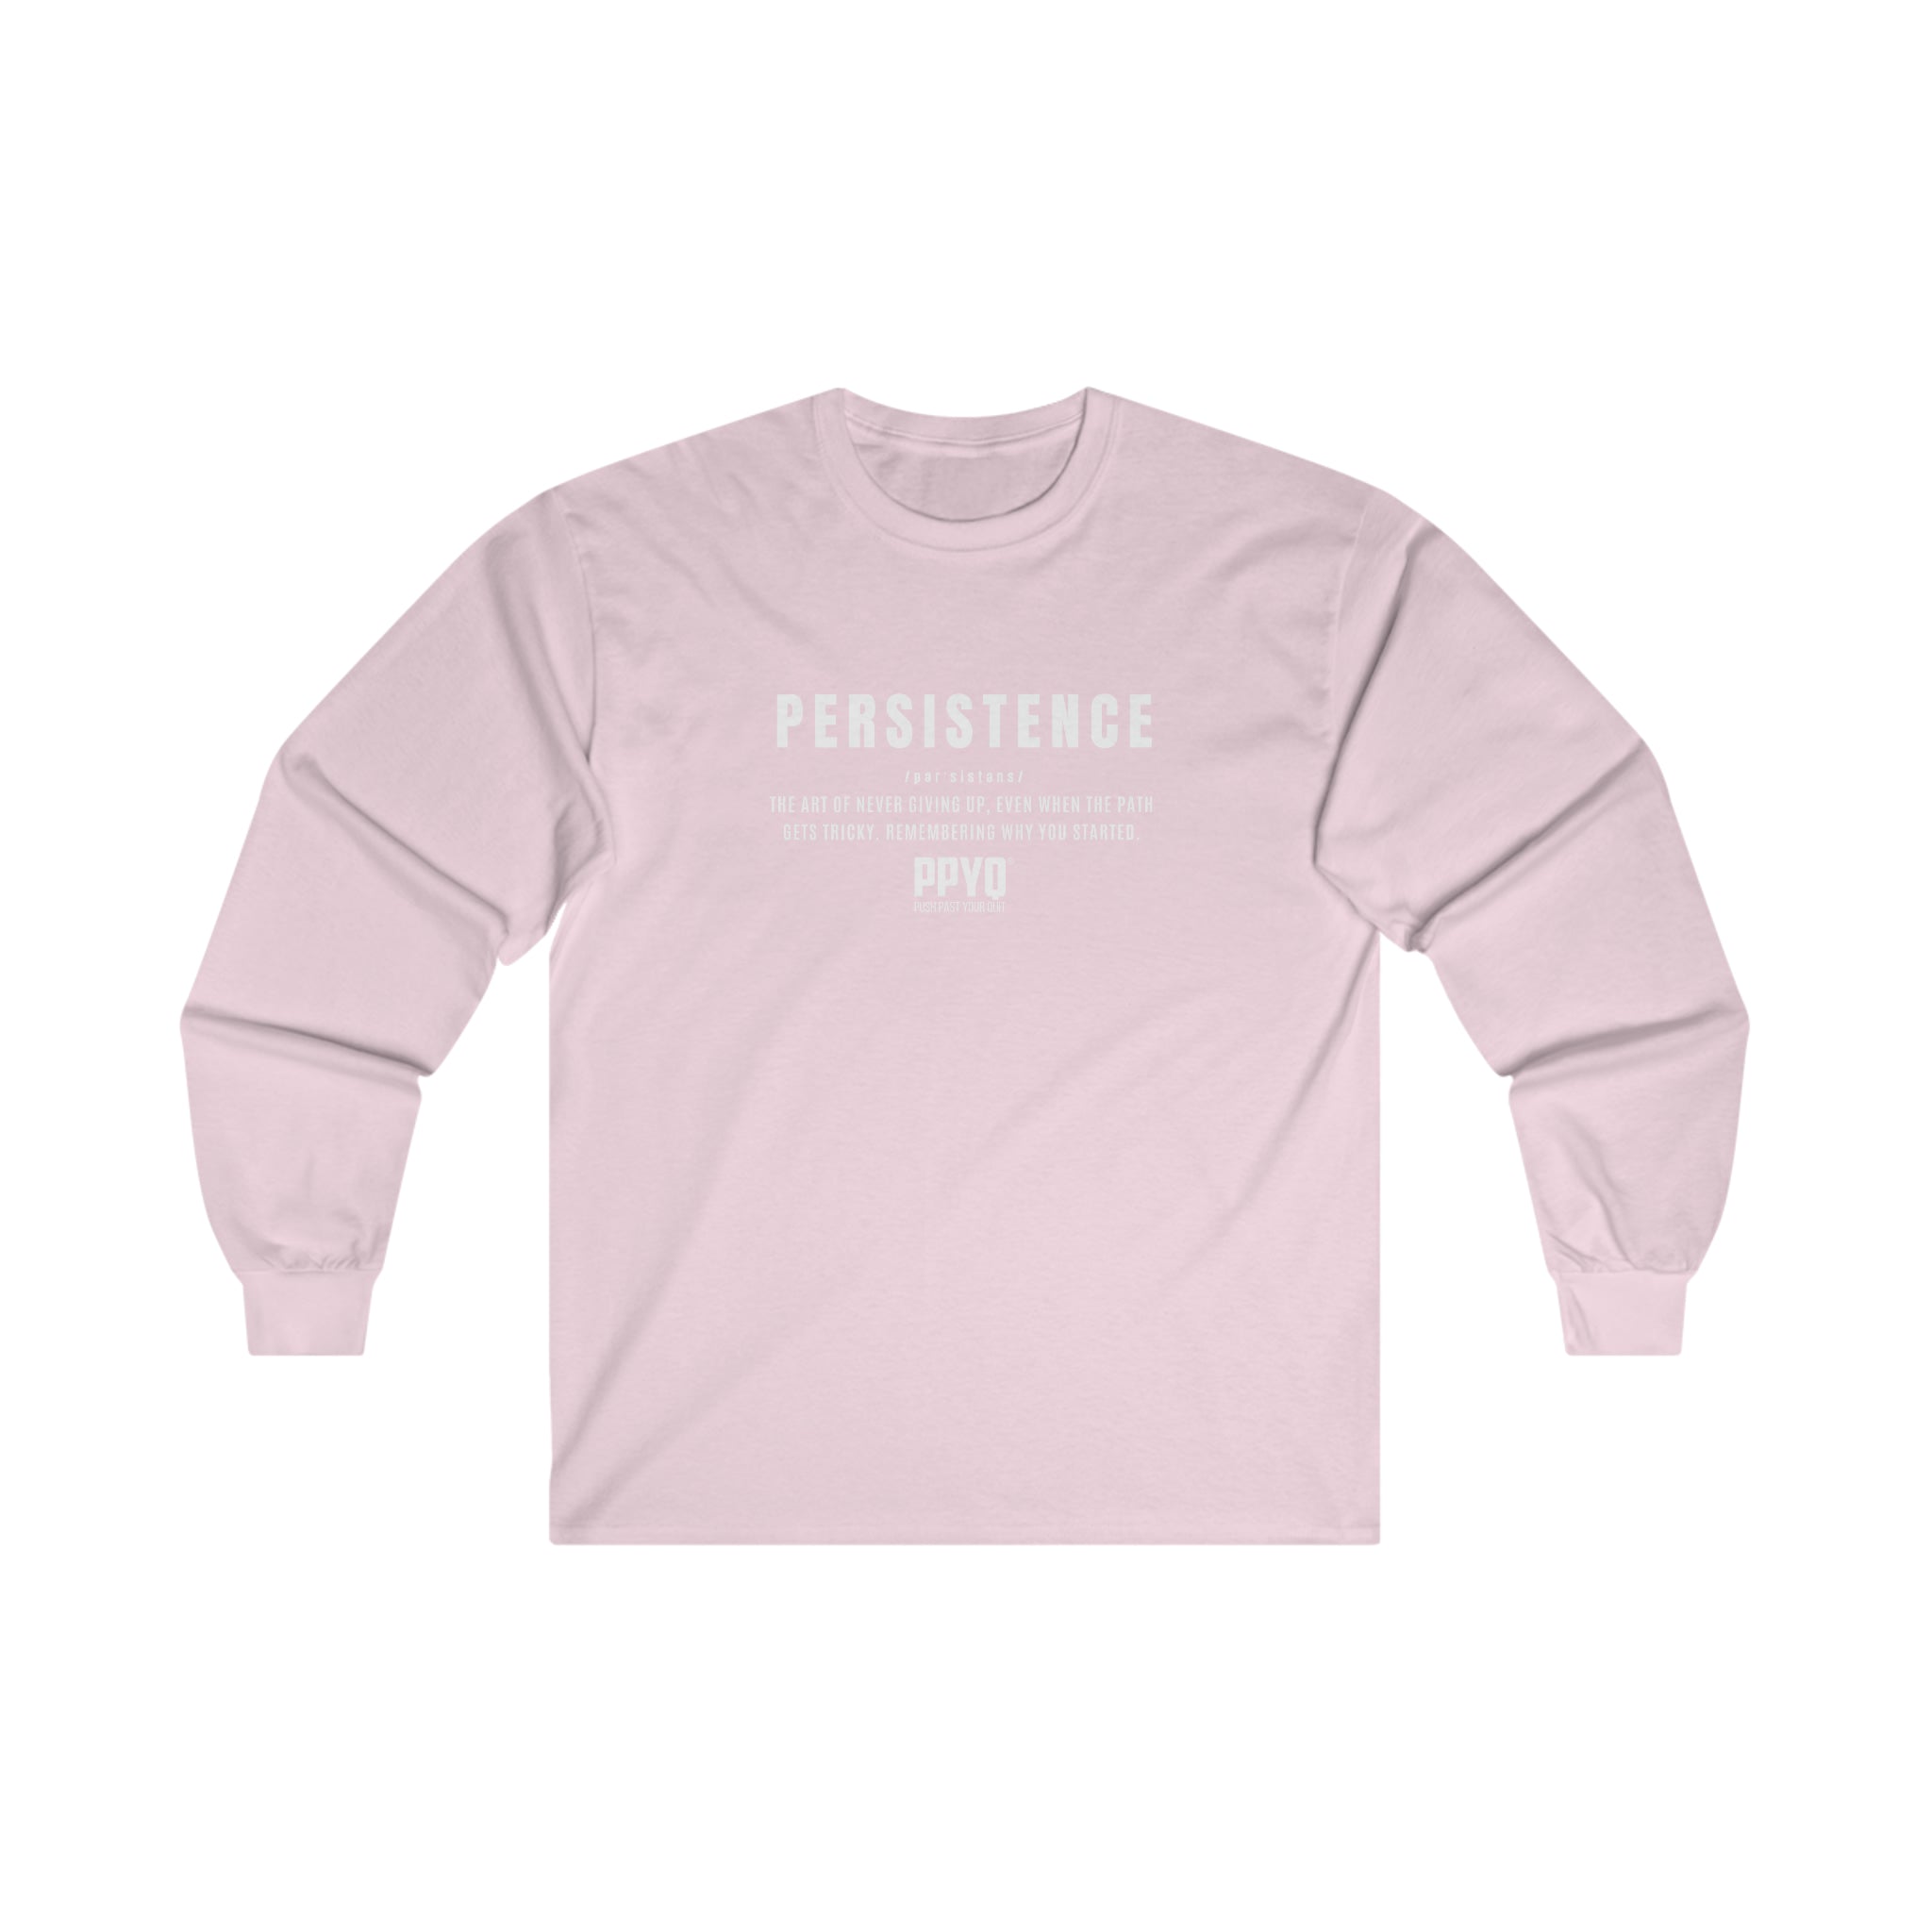 Persistence PPYQ® Defined Long Sleeve Tee